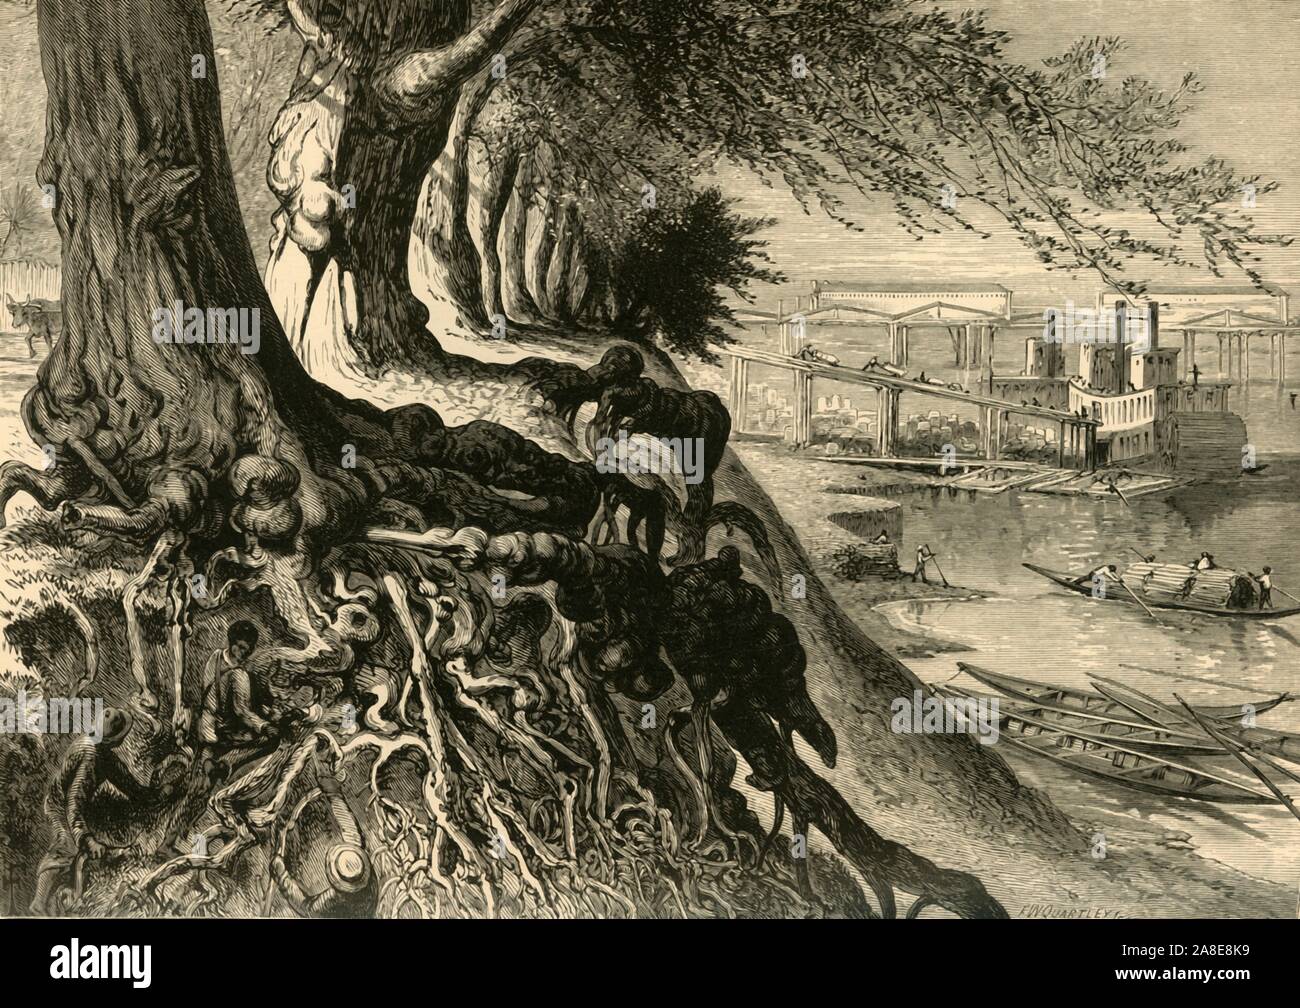 'The Savannah, at Augusta', 1872. Men working amongst twisted tree roots, on the Savannah River at Augusta, Georgia, USA. In the distance is a paddle steamer being loaded with goods. From &quot;Picturesque America; or, The Land We Live In, A Delineation by Pen and Pencil of the Mountains, Rivers, Lakes...with Illustrations on Steel and Wood by Eminent American Artists&quot; Vol. I, edited by William Cullen Bryant. [D. Appleton and Company, New York, 1872] Stock Photo